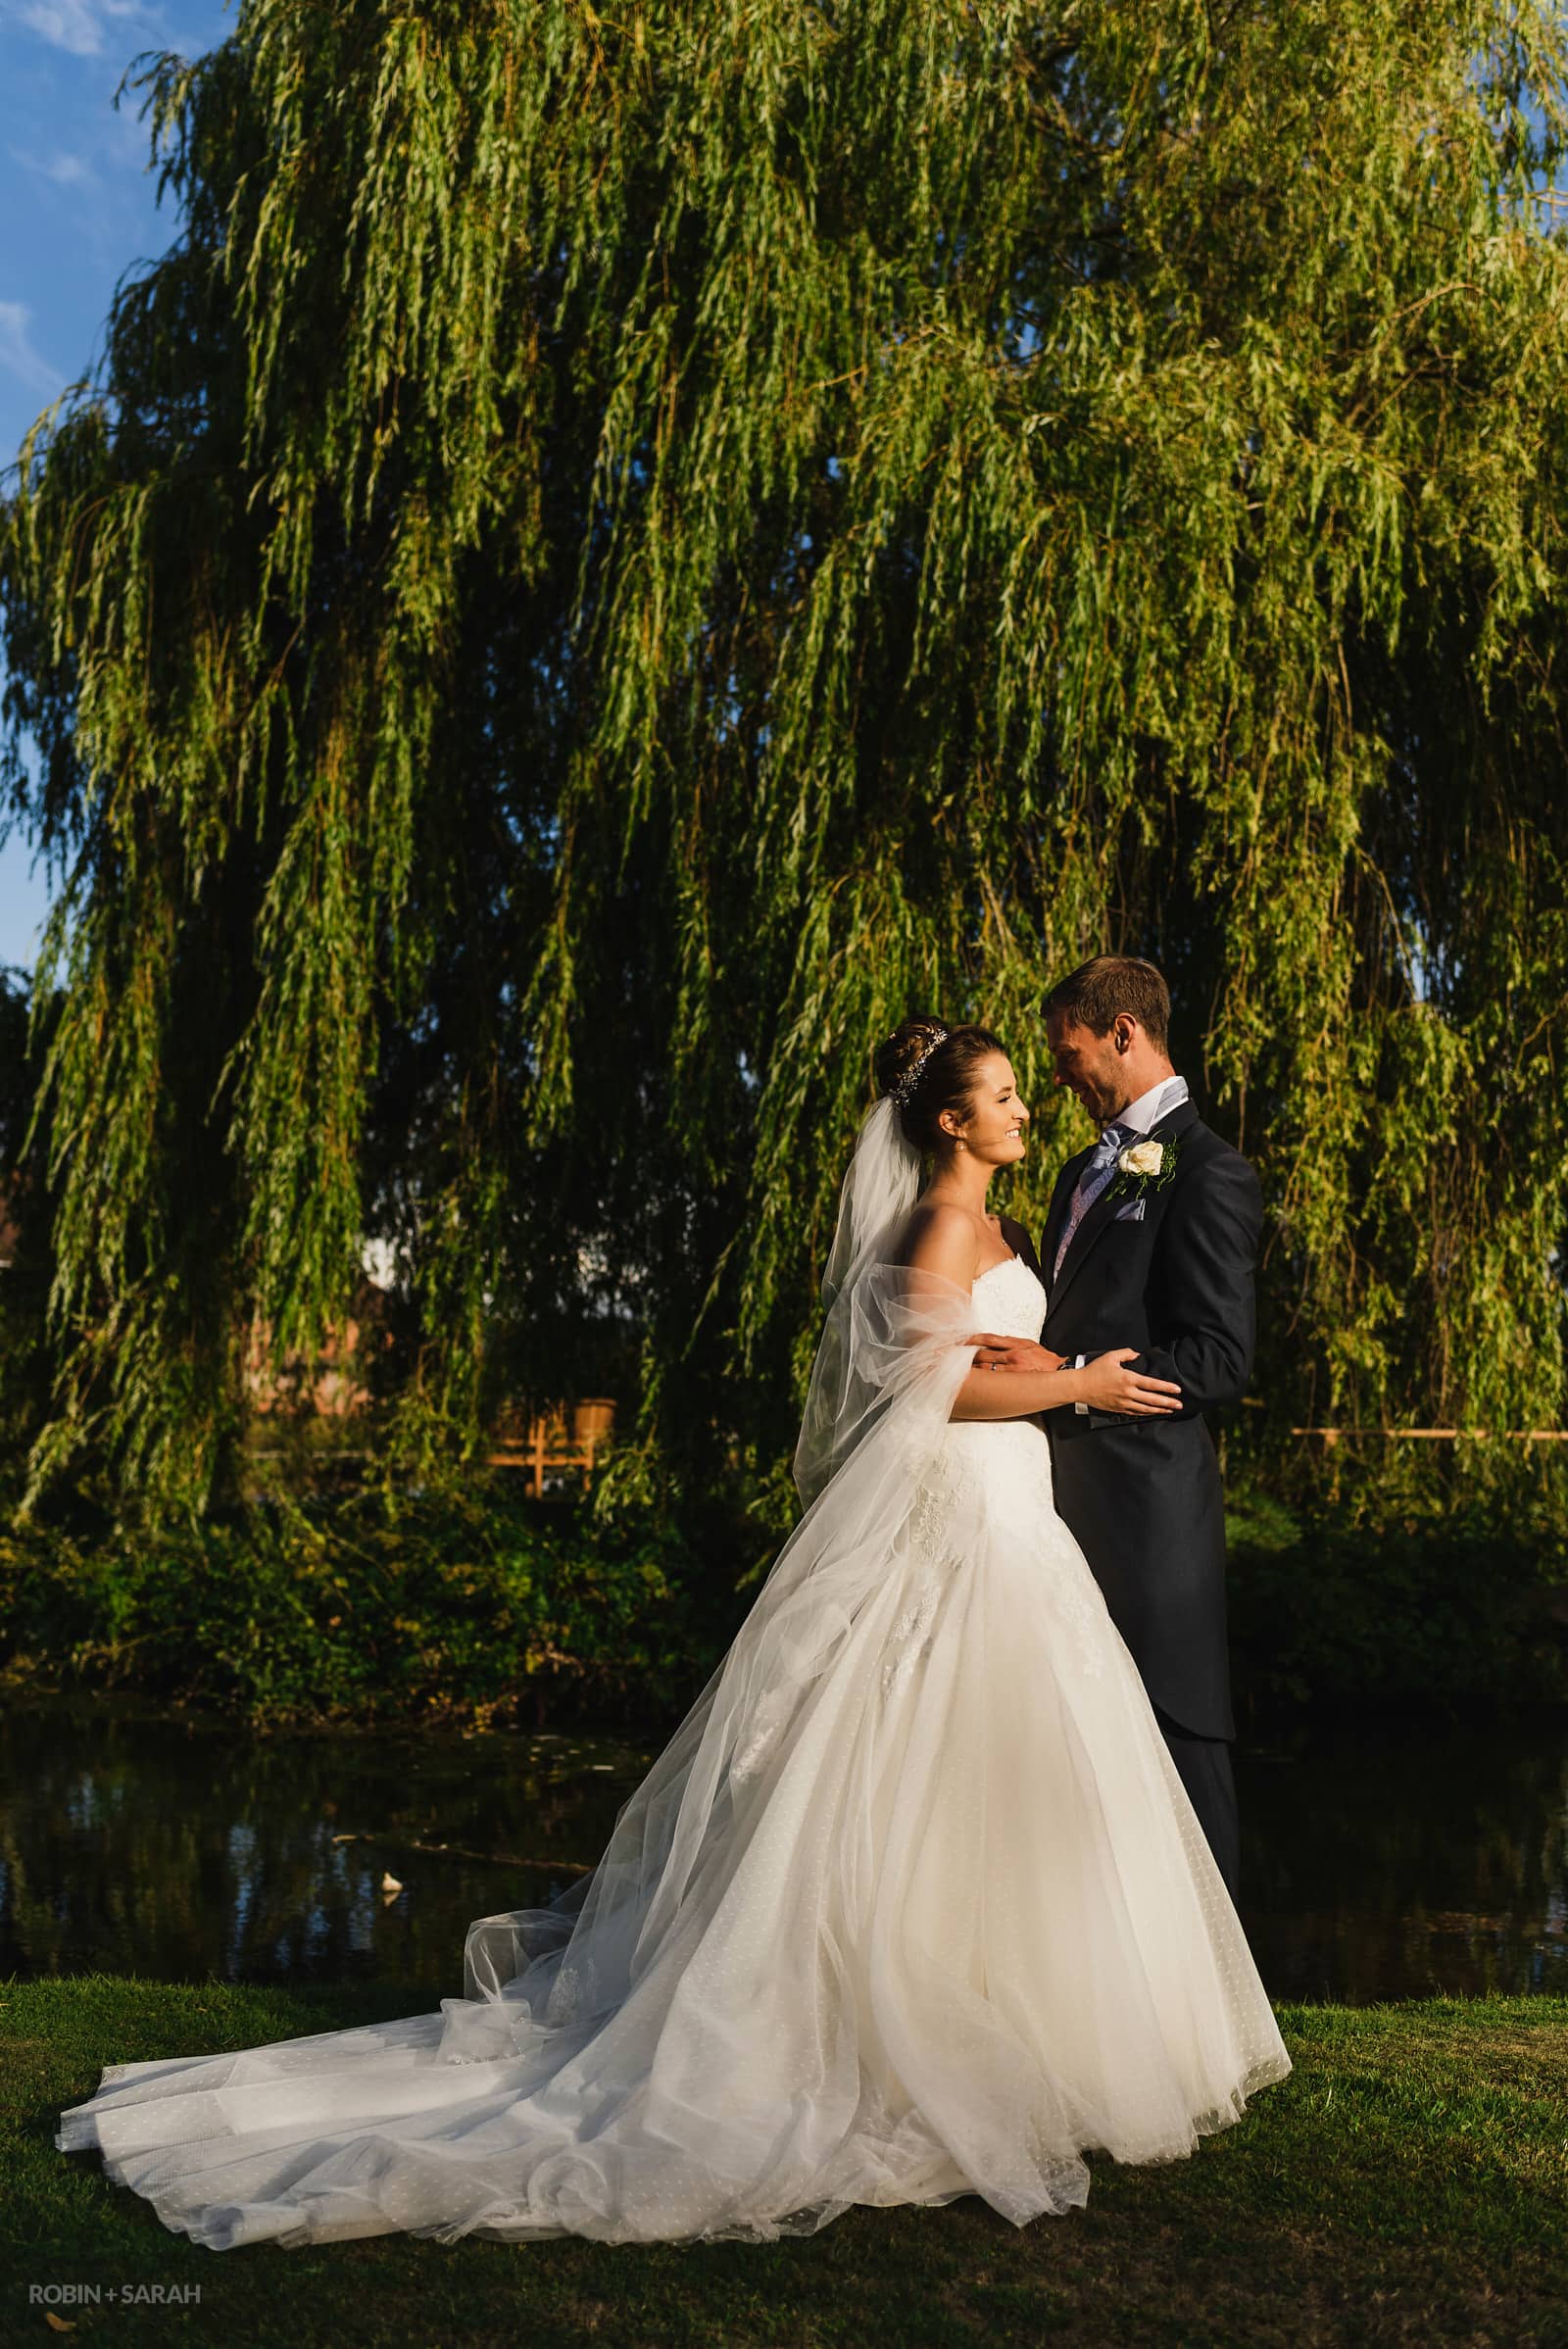 Bride and groom standing next to pond and trees in beautiful evening light